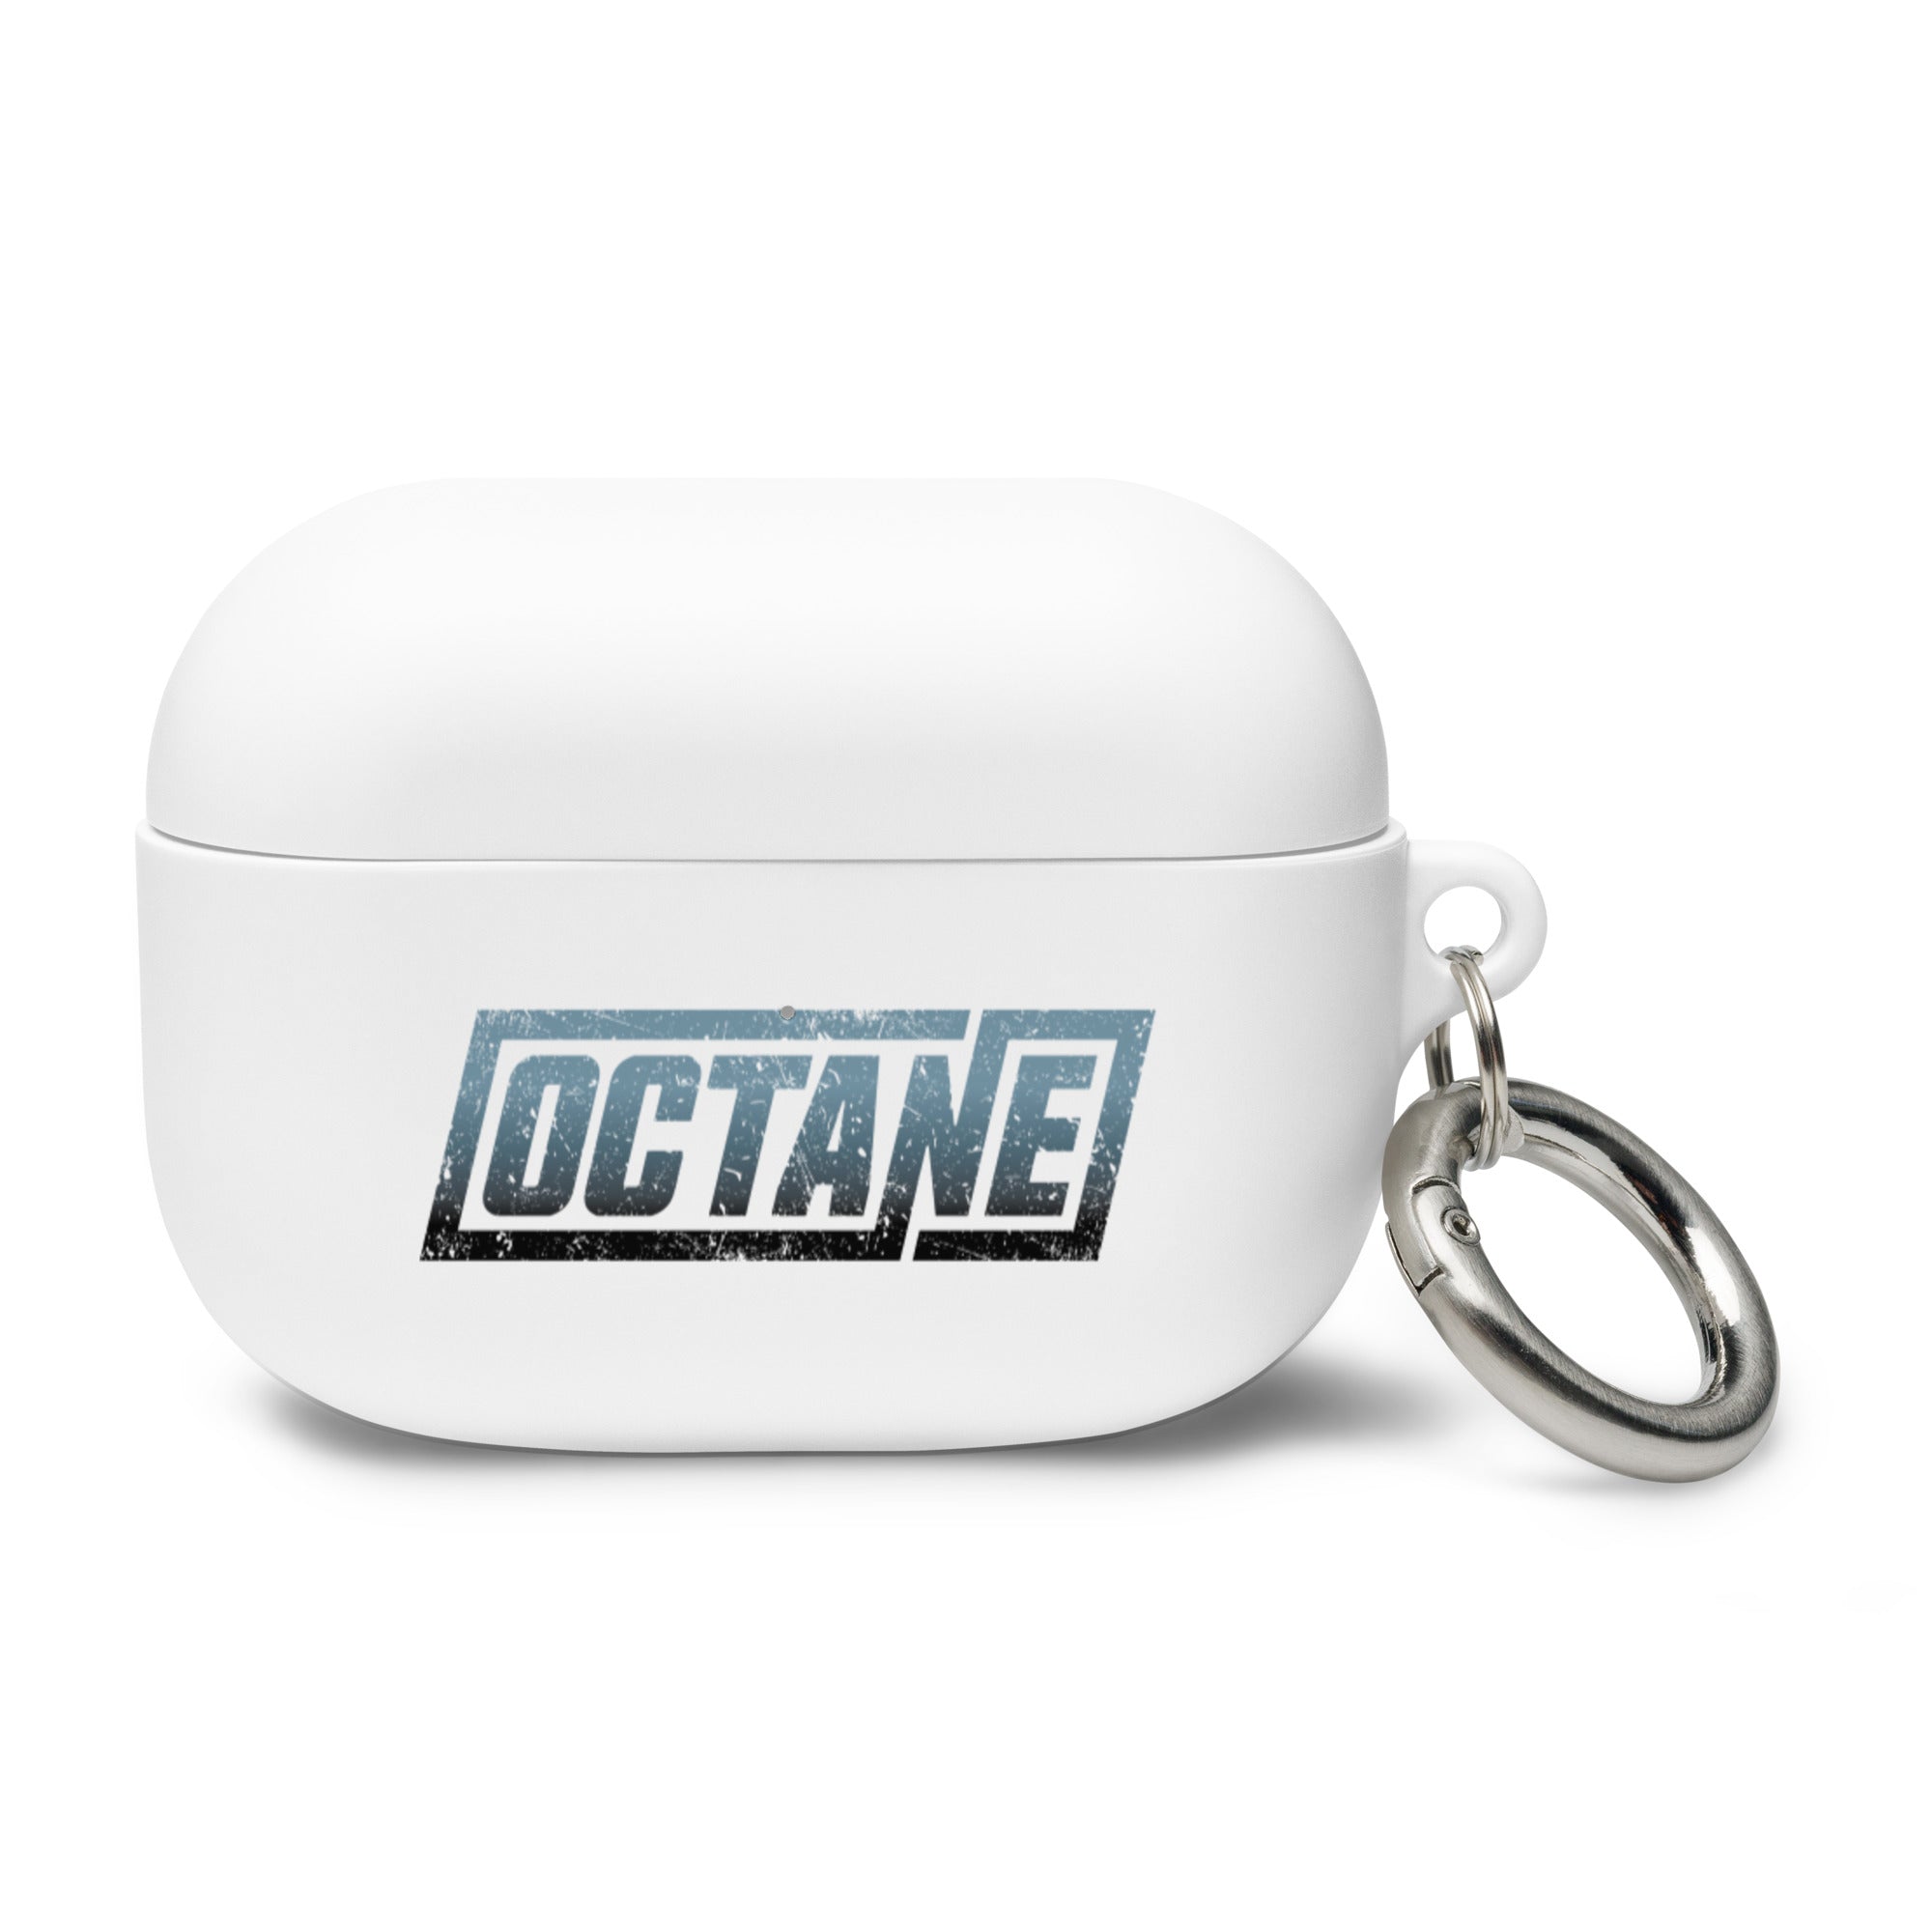 Octane: AirPods® Case Cover